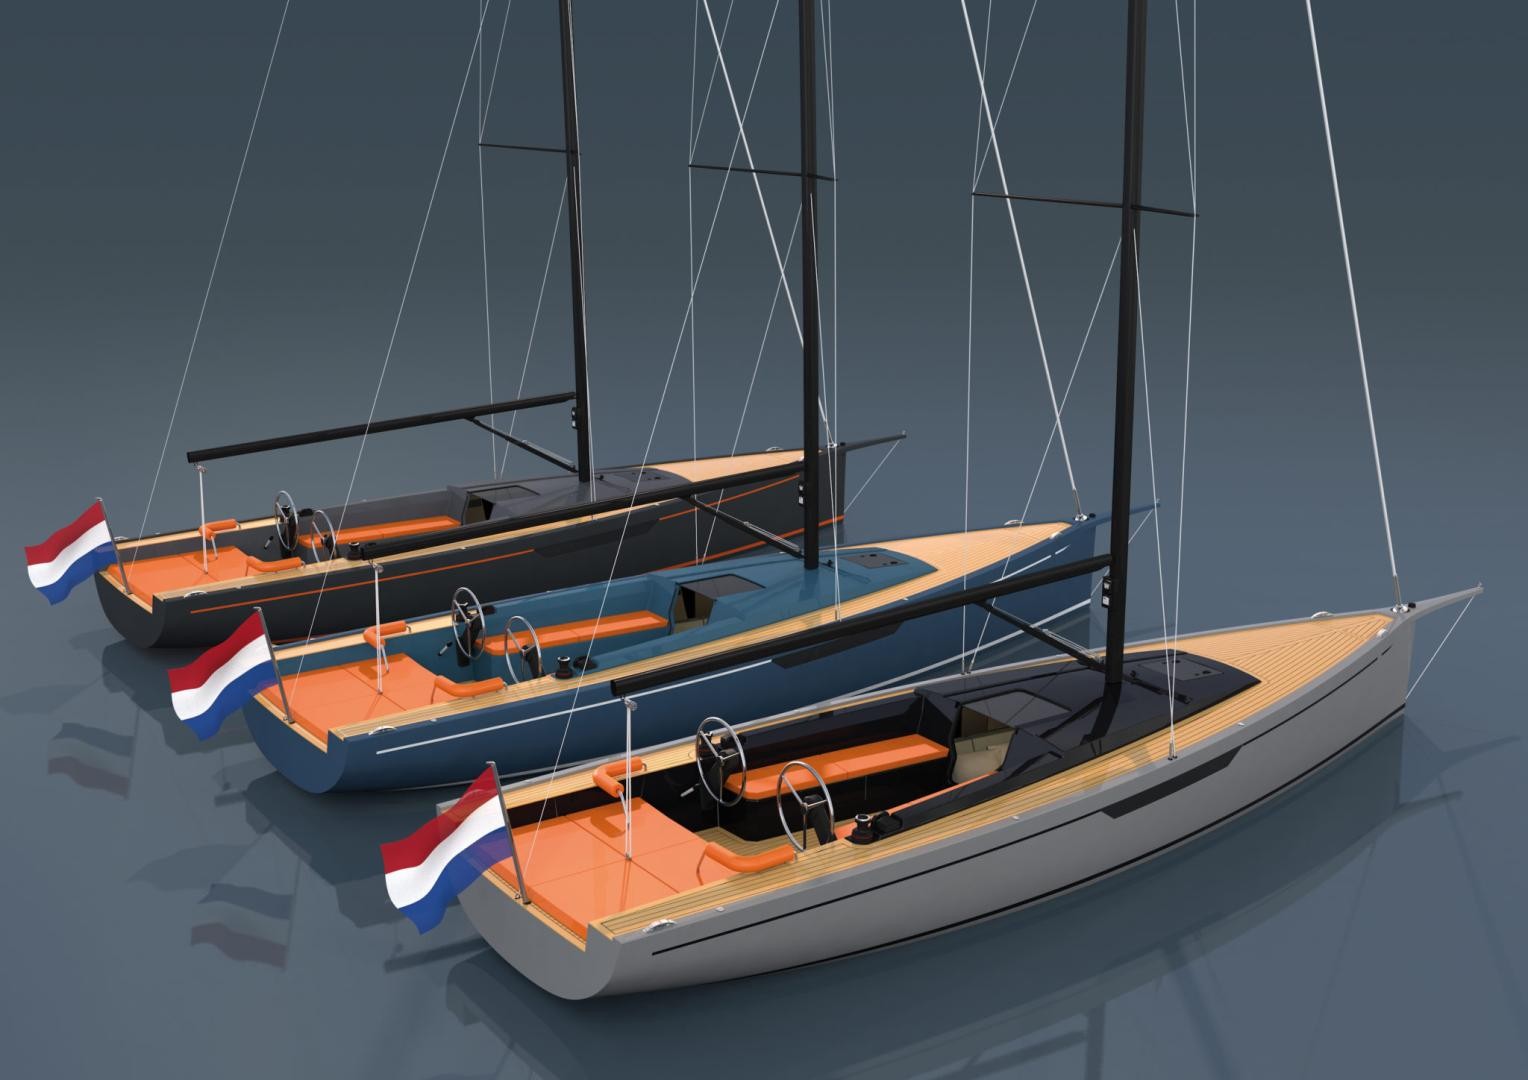 The Saffier Se 33 Life - the new standard in high end sailing